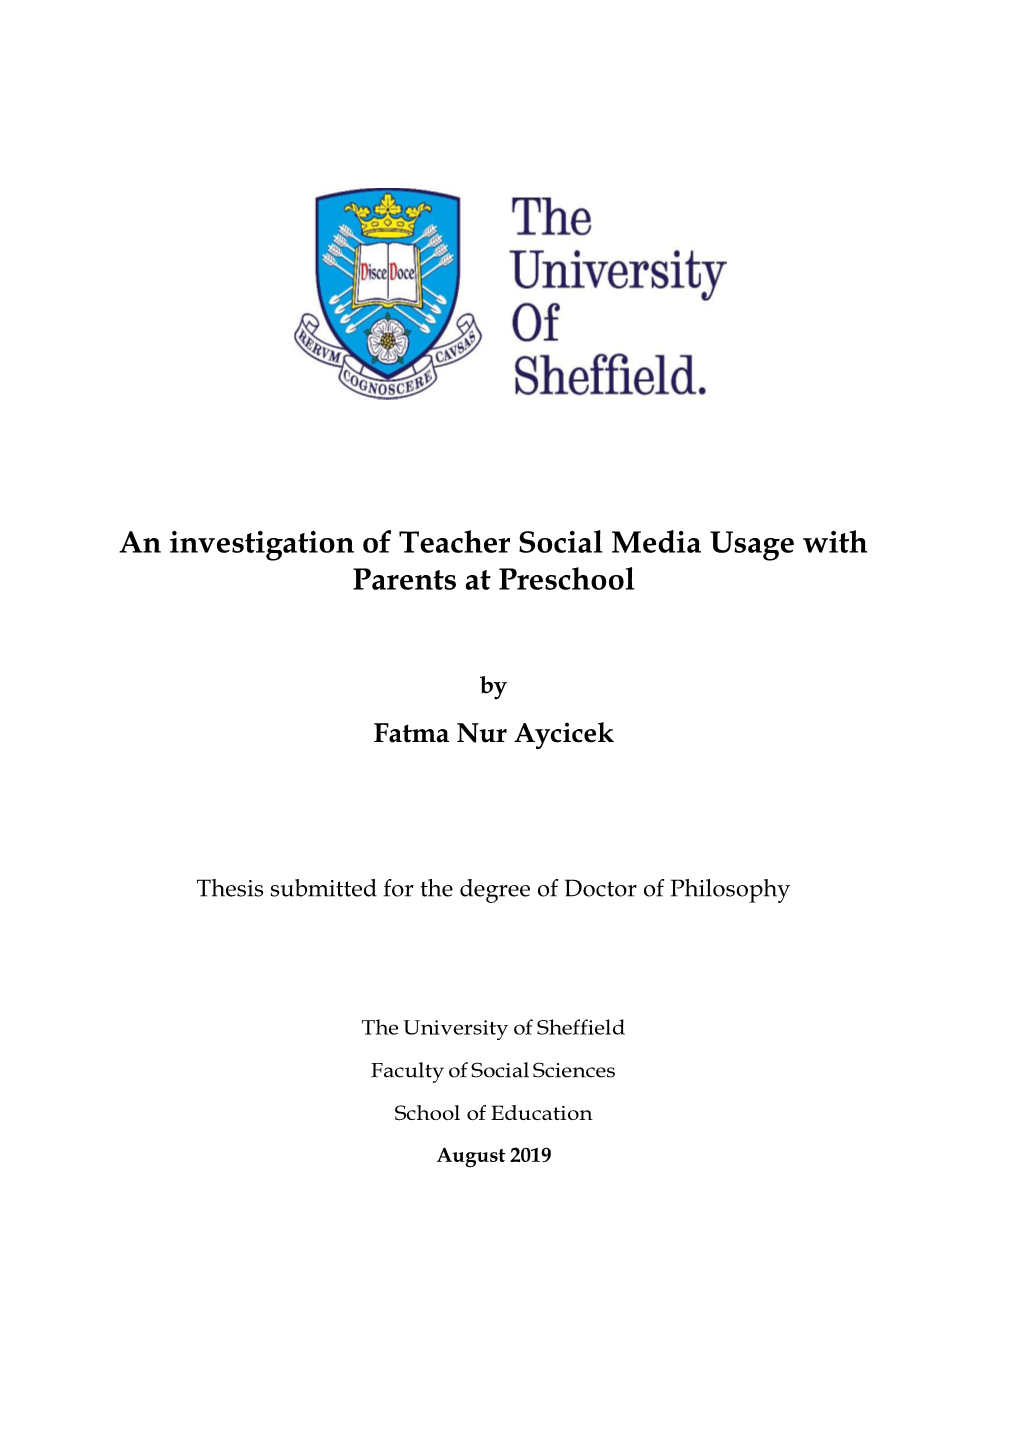 An Investigation of Teacher Social Media Usage with Parents at Preschool